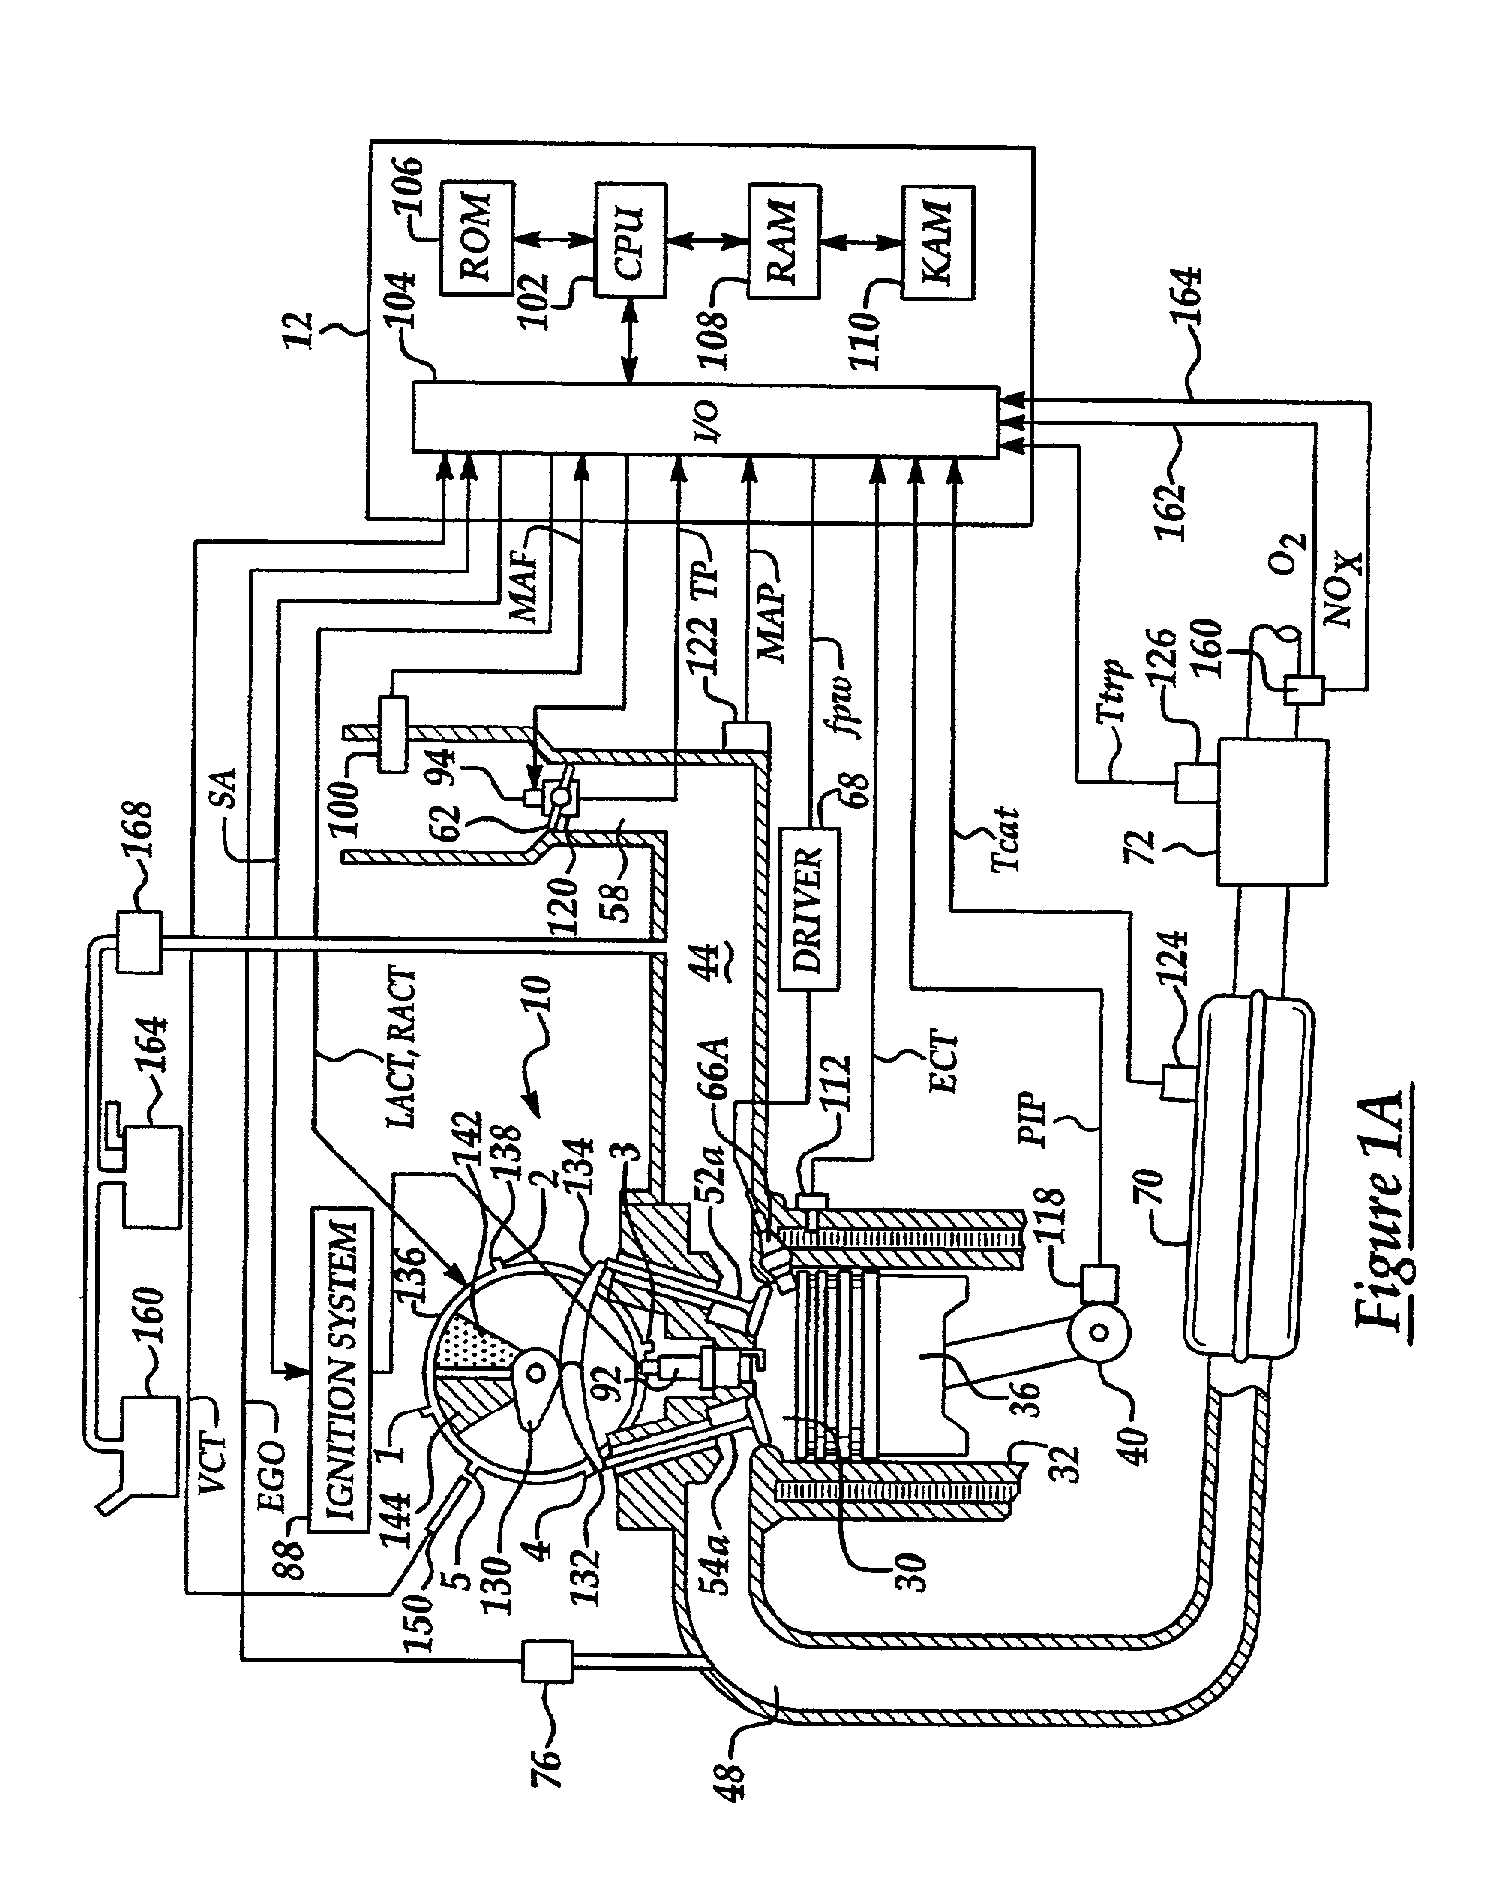 Method to improve fuel economy in lean burn engines with variable-displacement-like characteristics